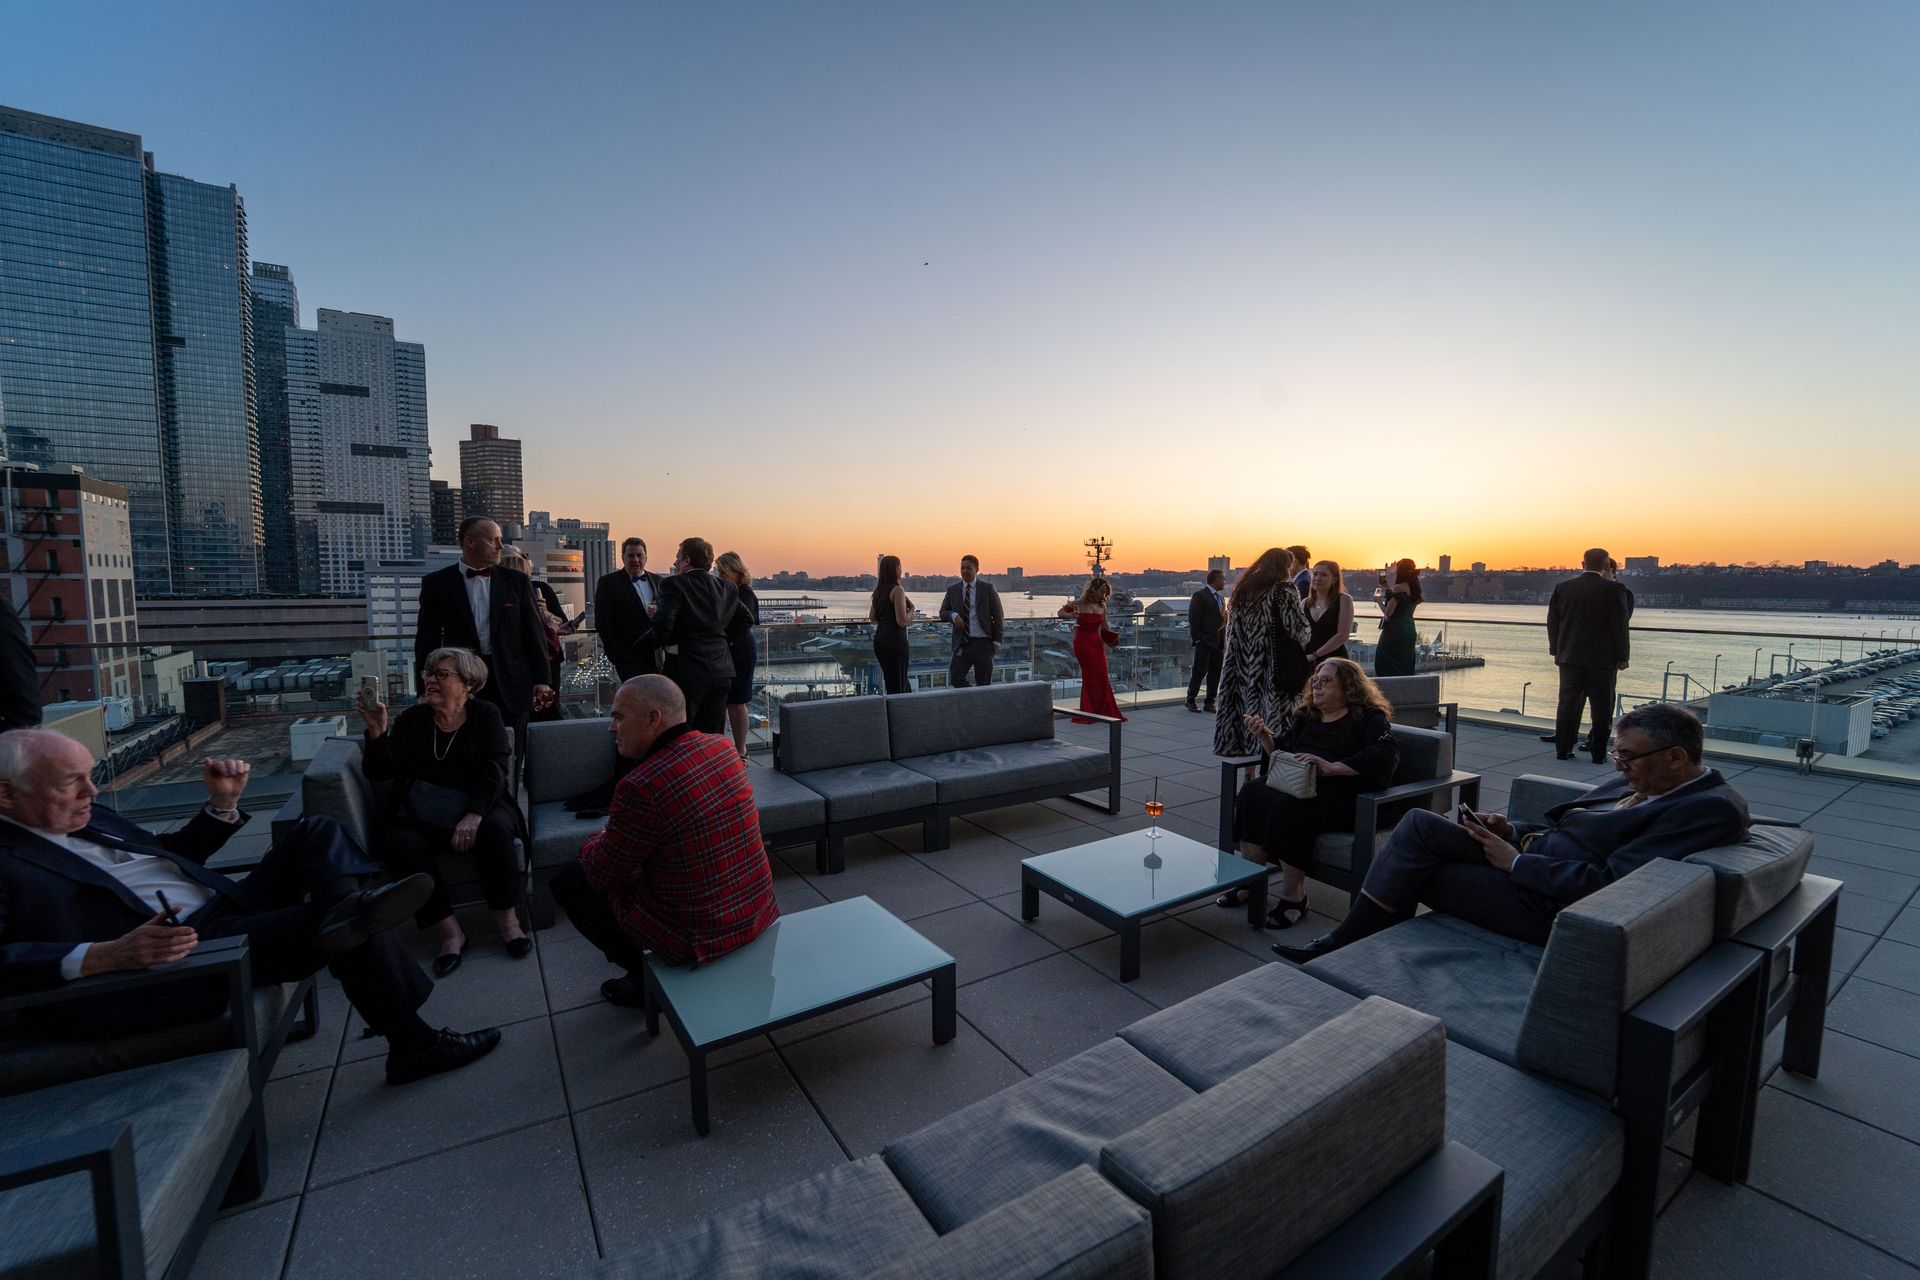 A group of people are sitting on a rooftop patio at sunset.